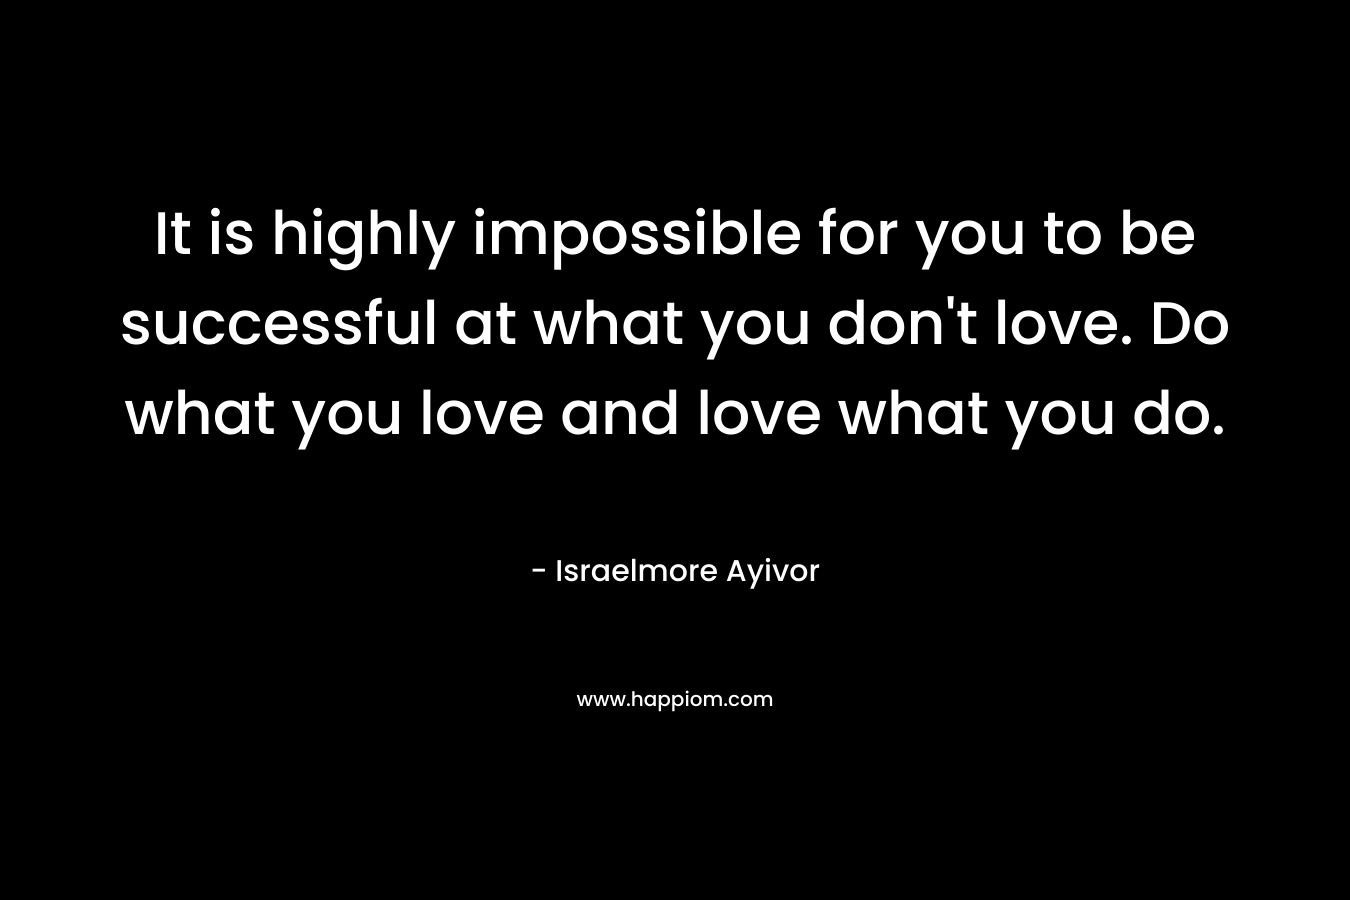 It is highly impossible for you to be successful at what you don't love. Do what you love and love what you do.